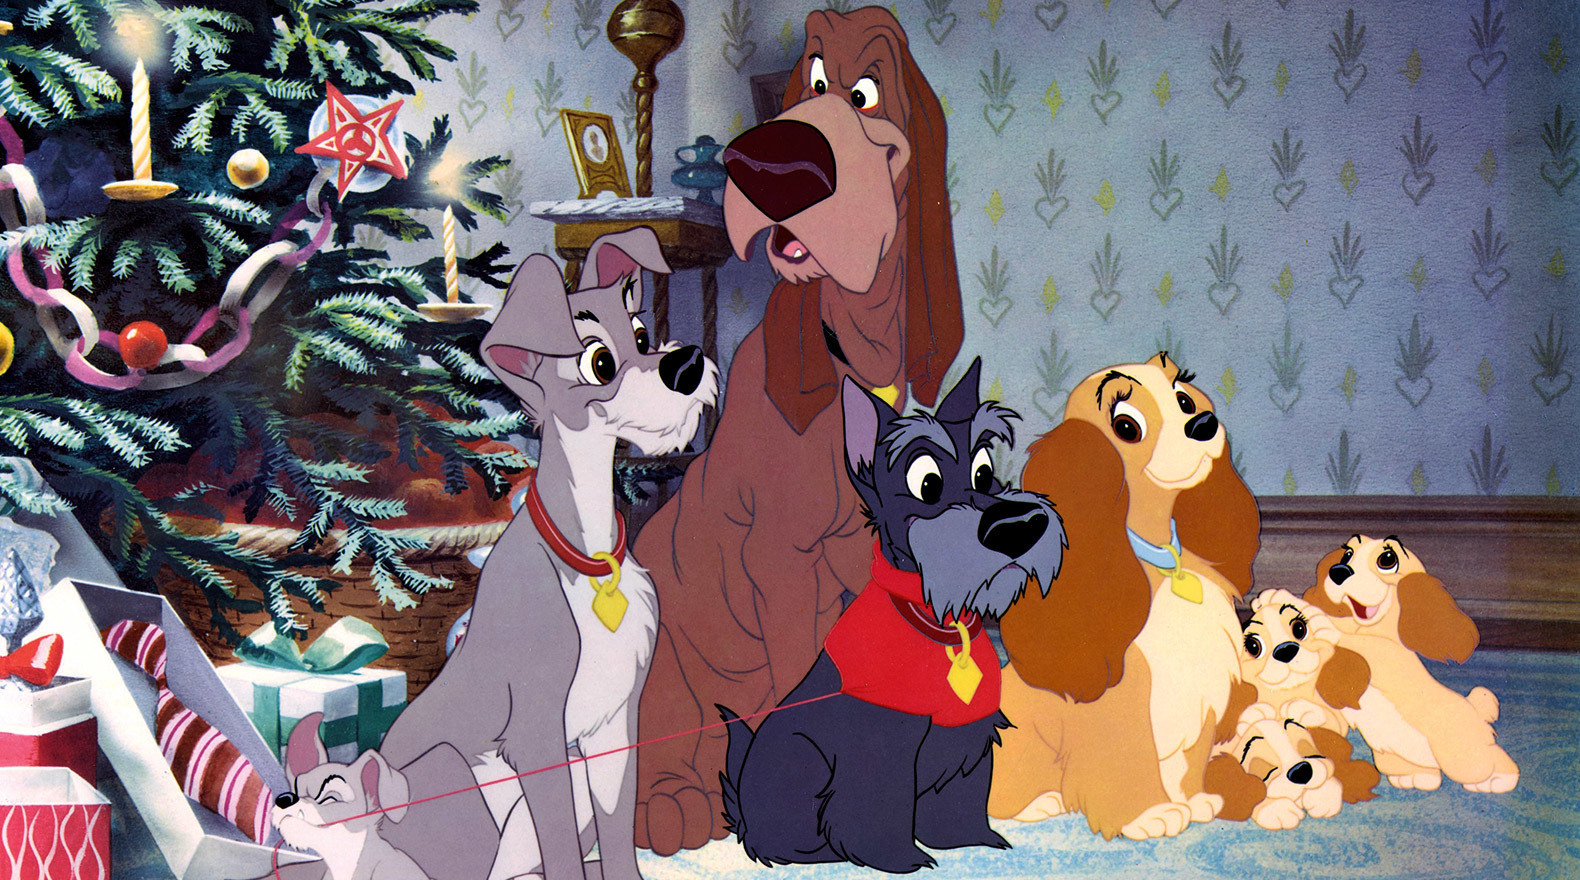 Lady and the Tramp Gallery | Disney Movies